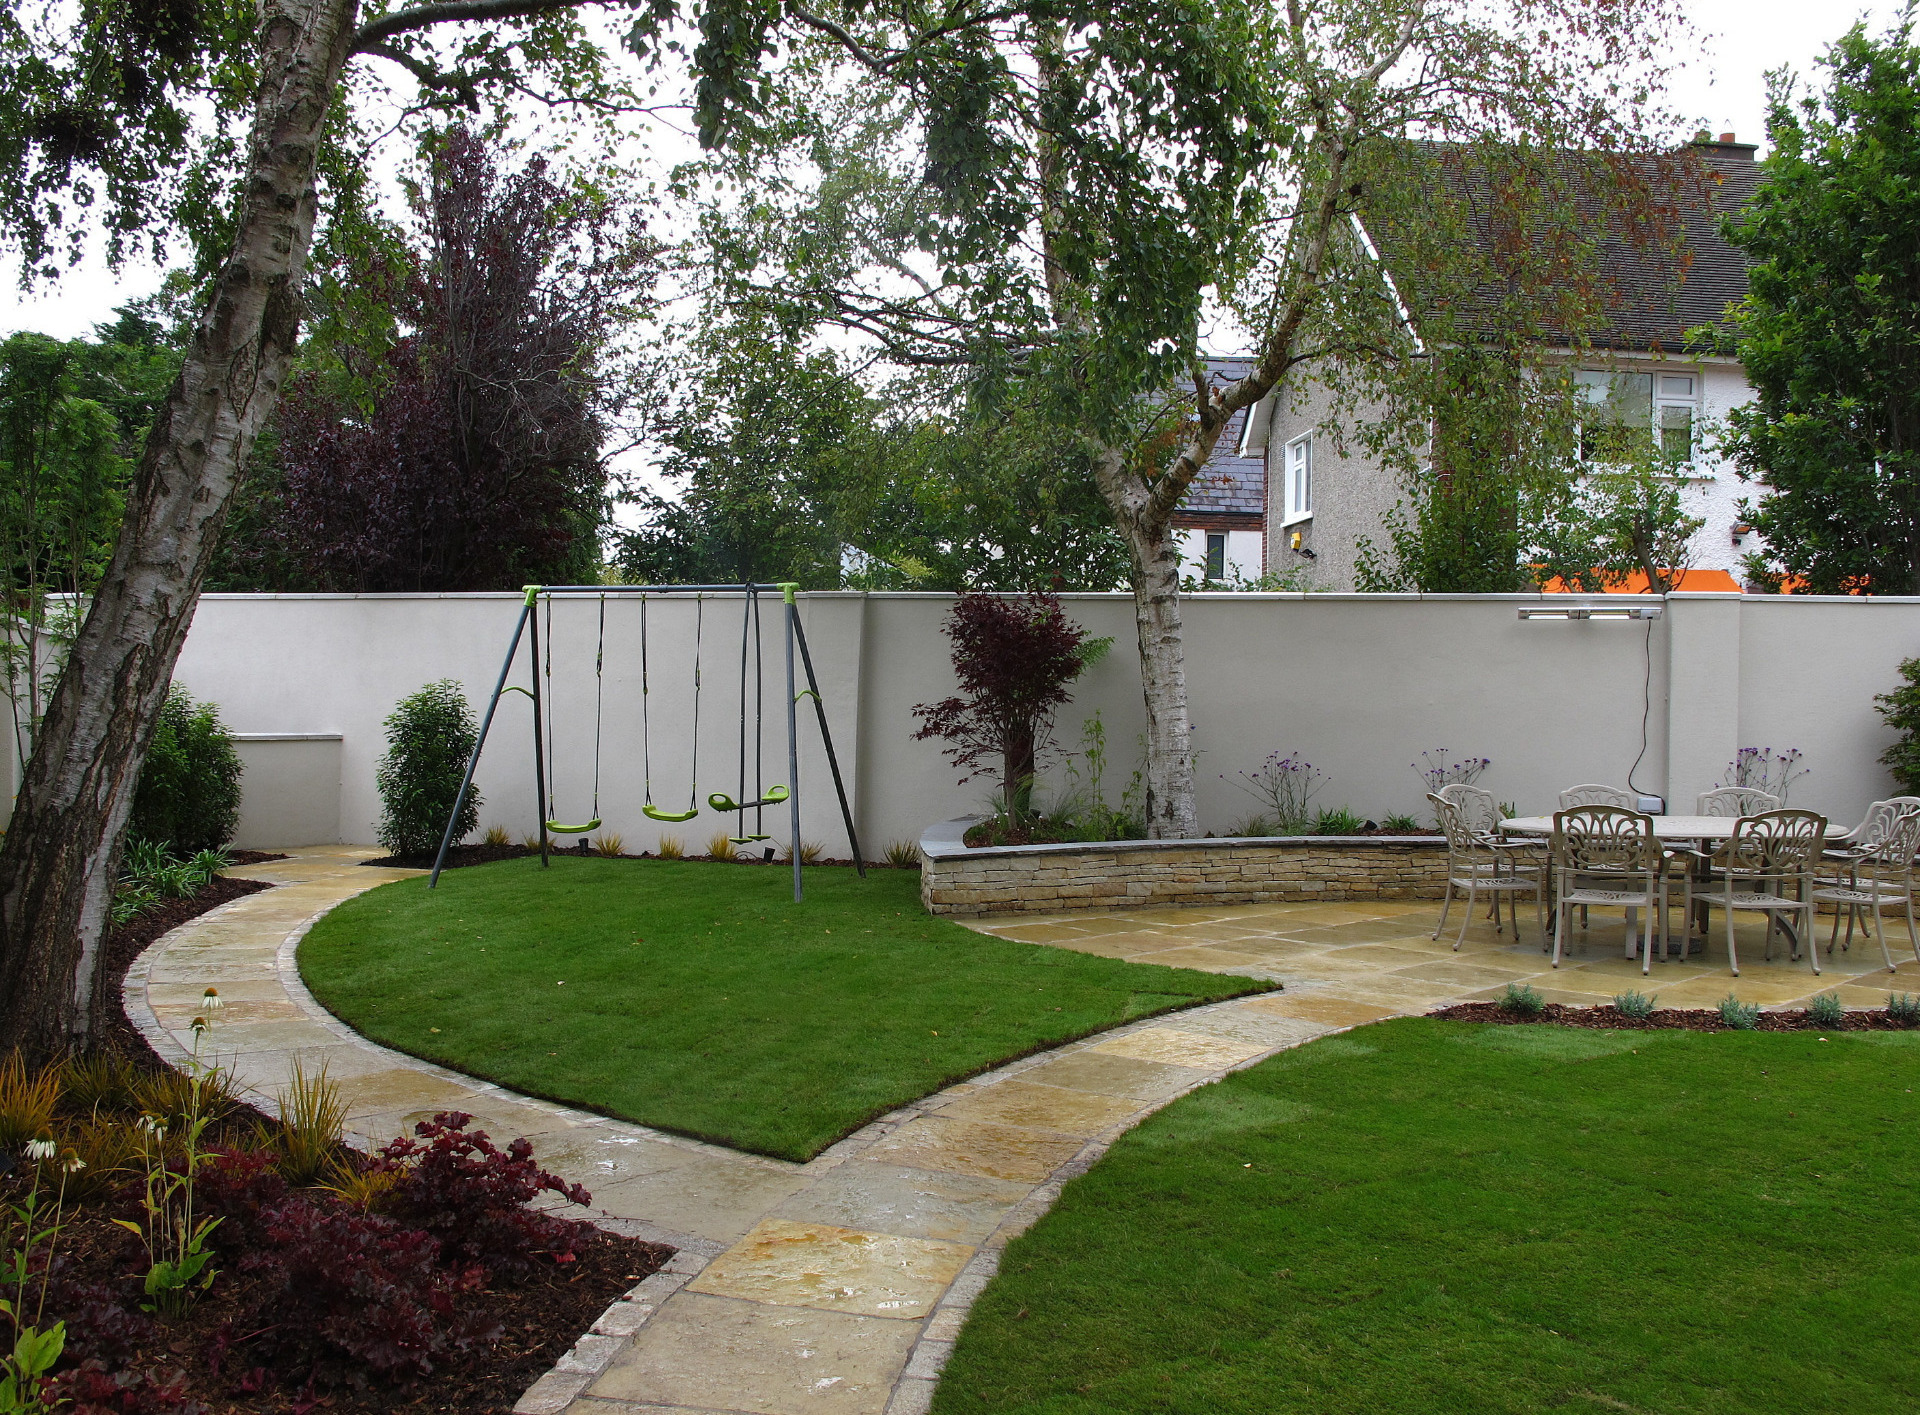 Family Graden patio &paving installation in Donnybrook, Dublin 4 | Owen Chubb Garden Landscaping services for discerning Homeowners